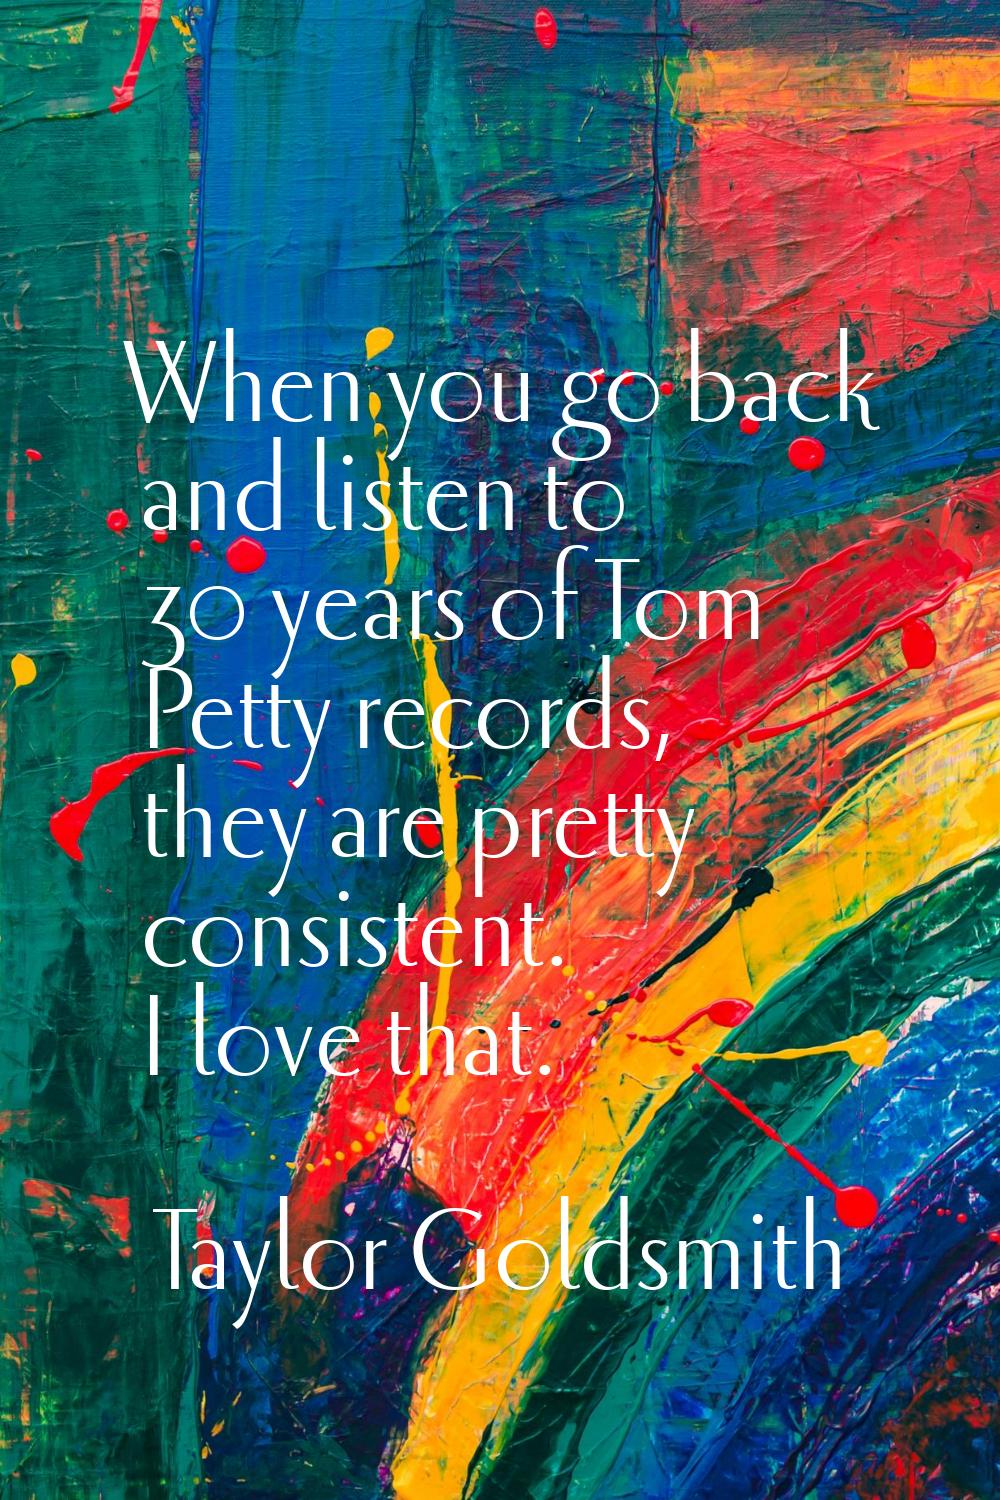 When you go back and listen to 30 years of Tom Petty records, they are pretty consistent. I love th